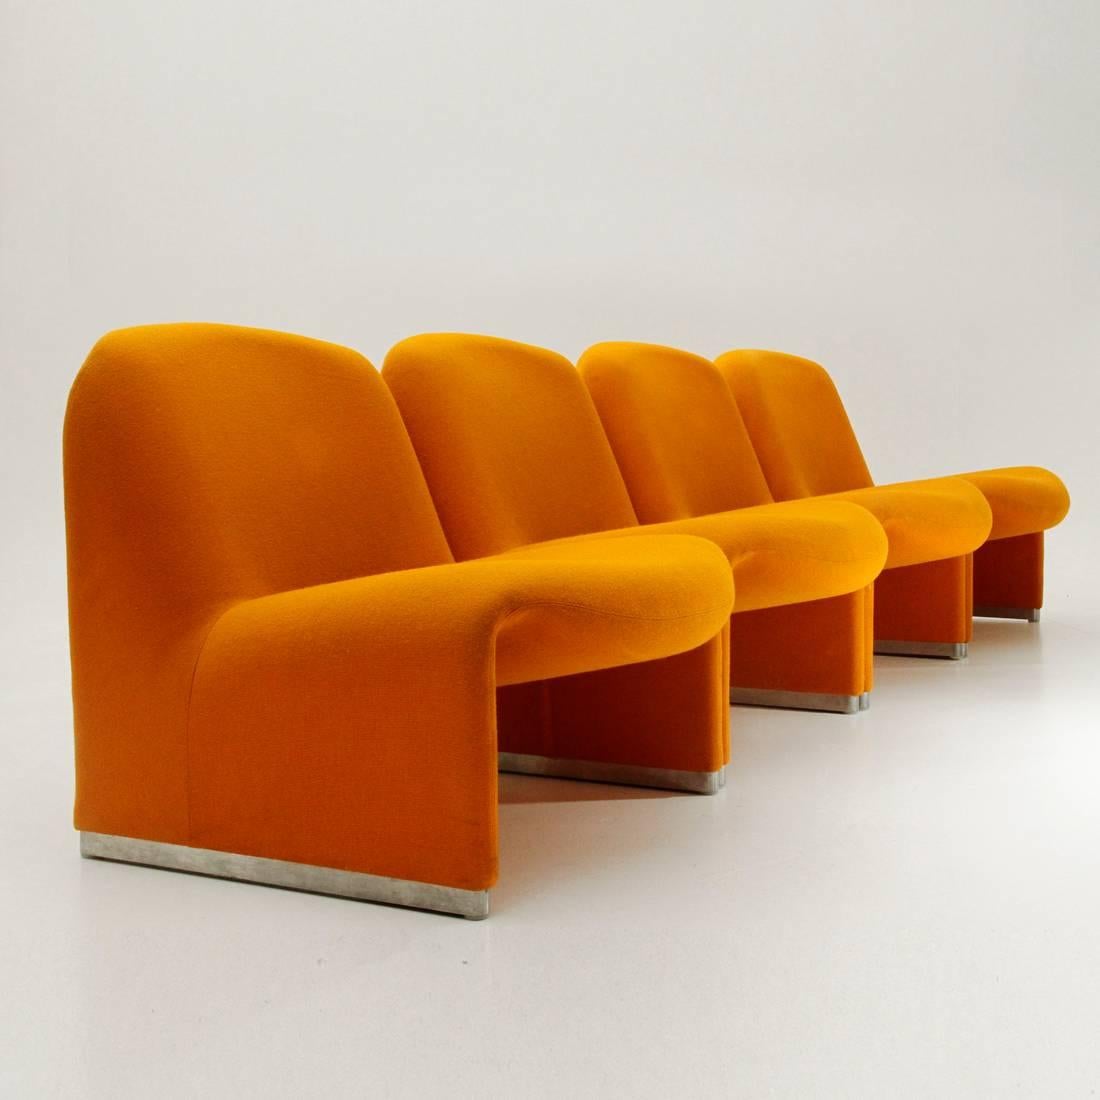 Four armchairs produced by Anonima Castelli by Giancarlo Piretti.
Wooden structure, padded and lined with orange fabric.
Metal feet.
Structure in good condition, fabric with some stains.

Dimensions: Width 65 cm, depth 75 cm, height 70 cm, seat